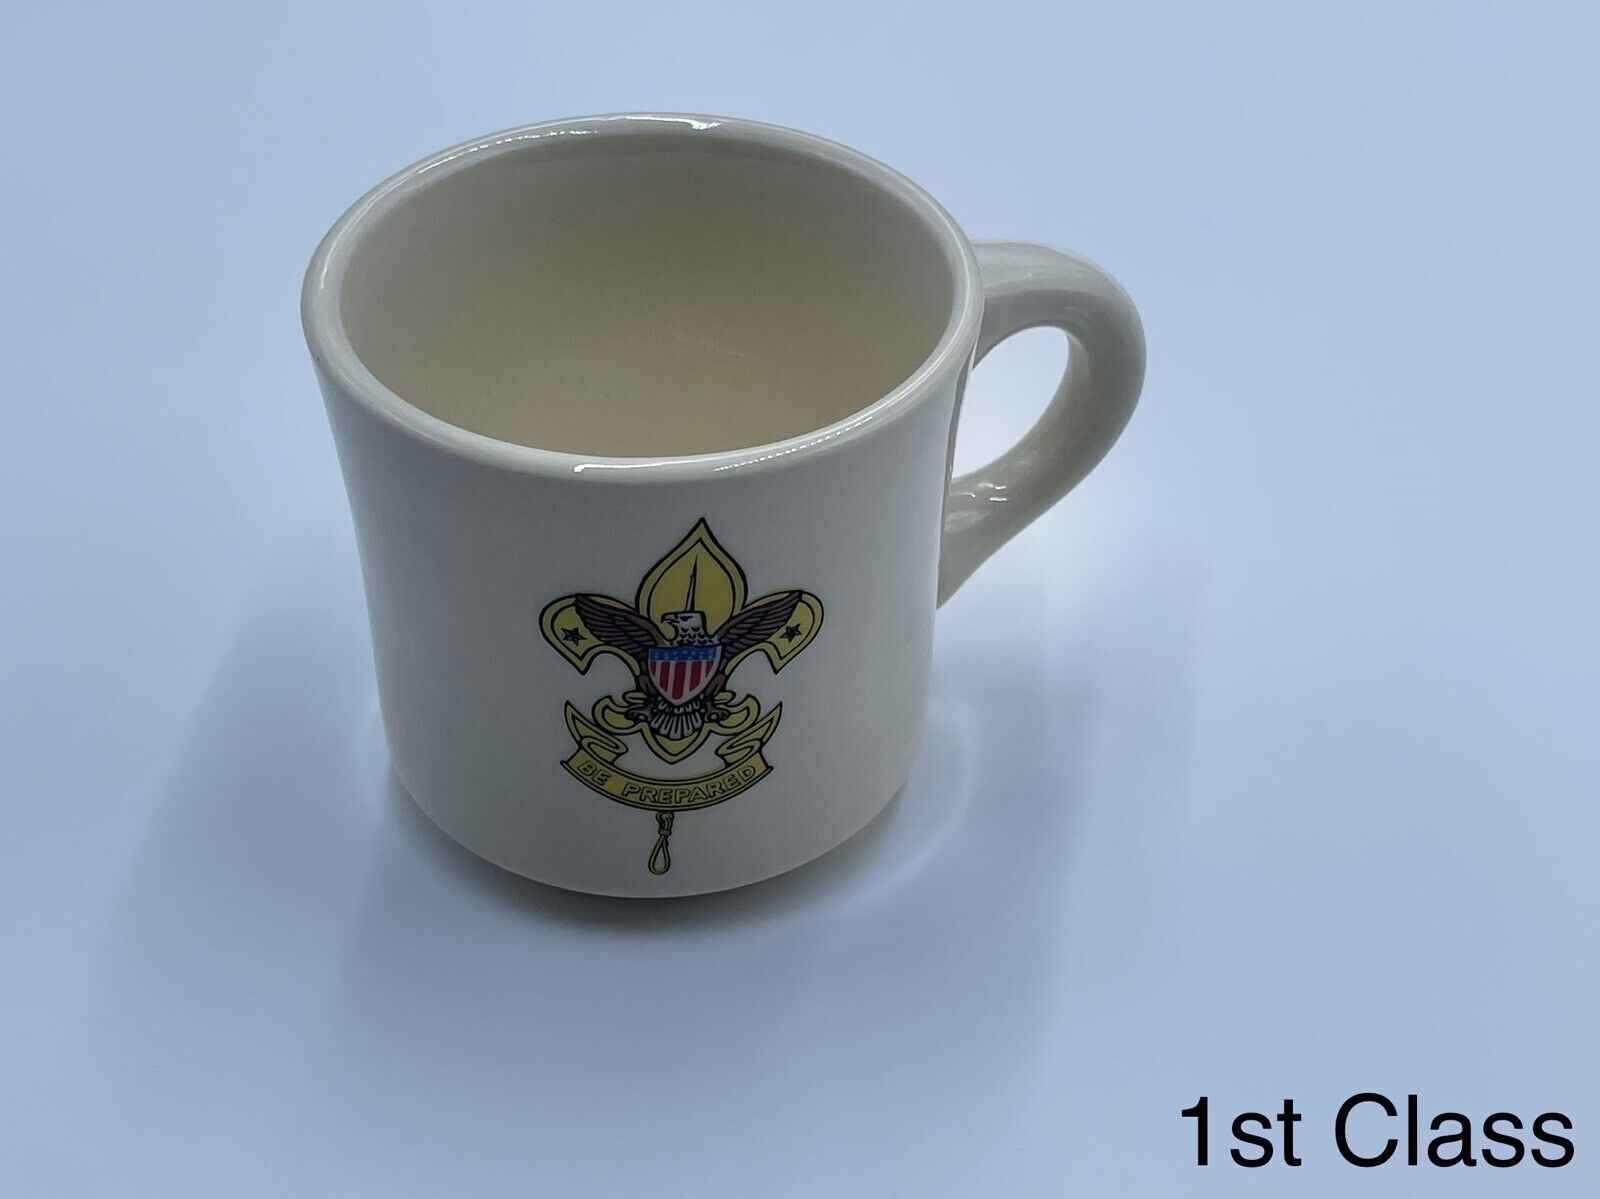 Vintage Boy Scout Coffee Mugs Bsa - Most Early 1970s - Great Condition, No Chips